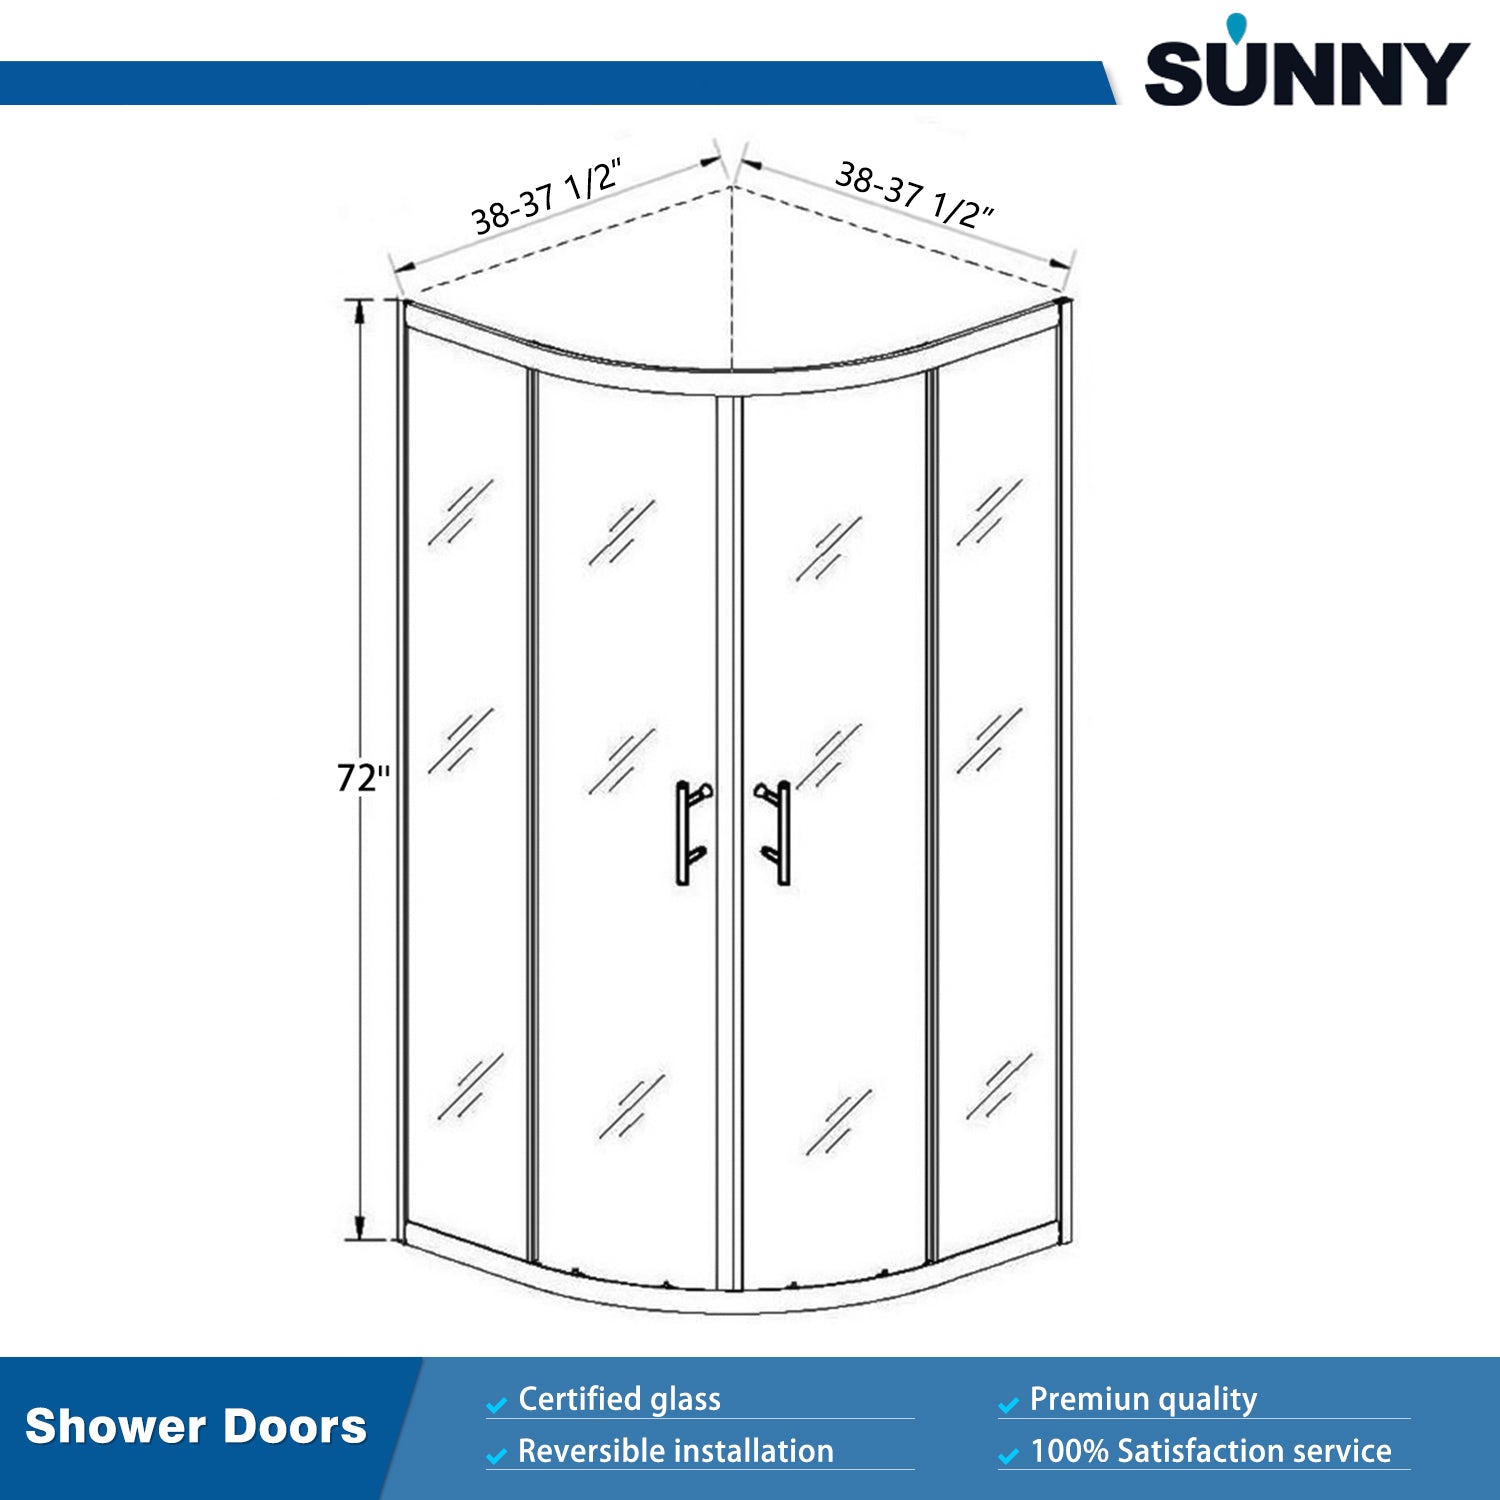 SUNNY SHOWER 38 in. W x 38 in. D x 72 in. H Chrome Finish Quadrant Enclosures With Sliding Doors Size Chart